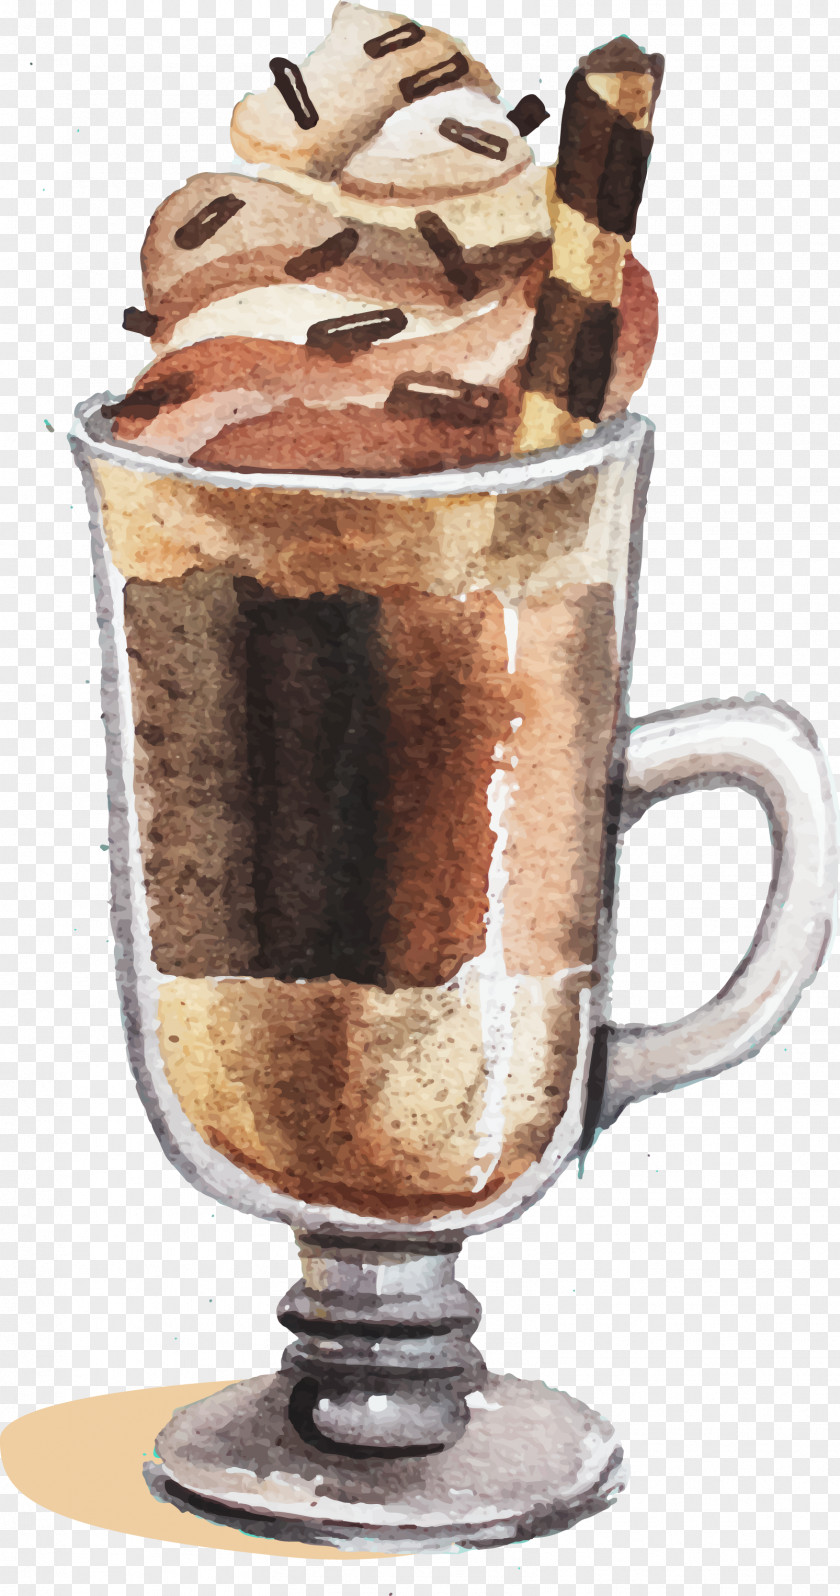 Cup-shaped Pastry Dessert PNG